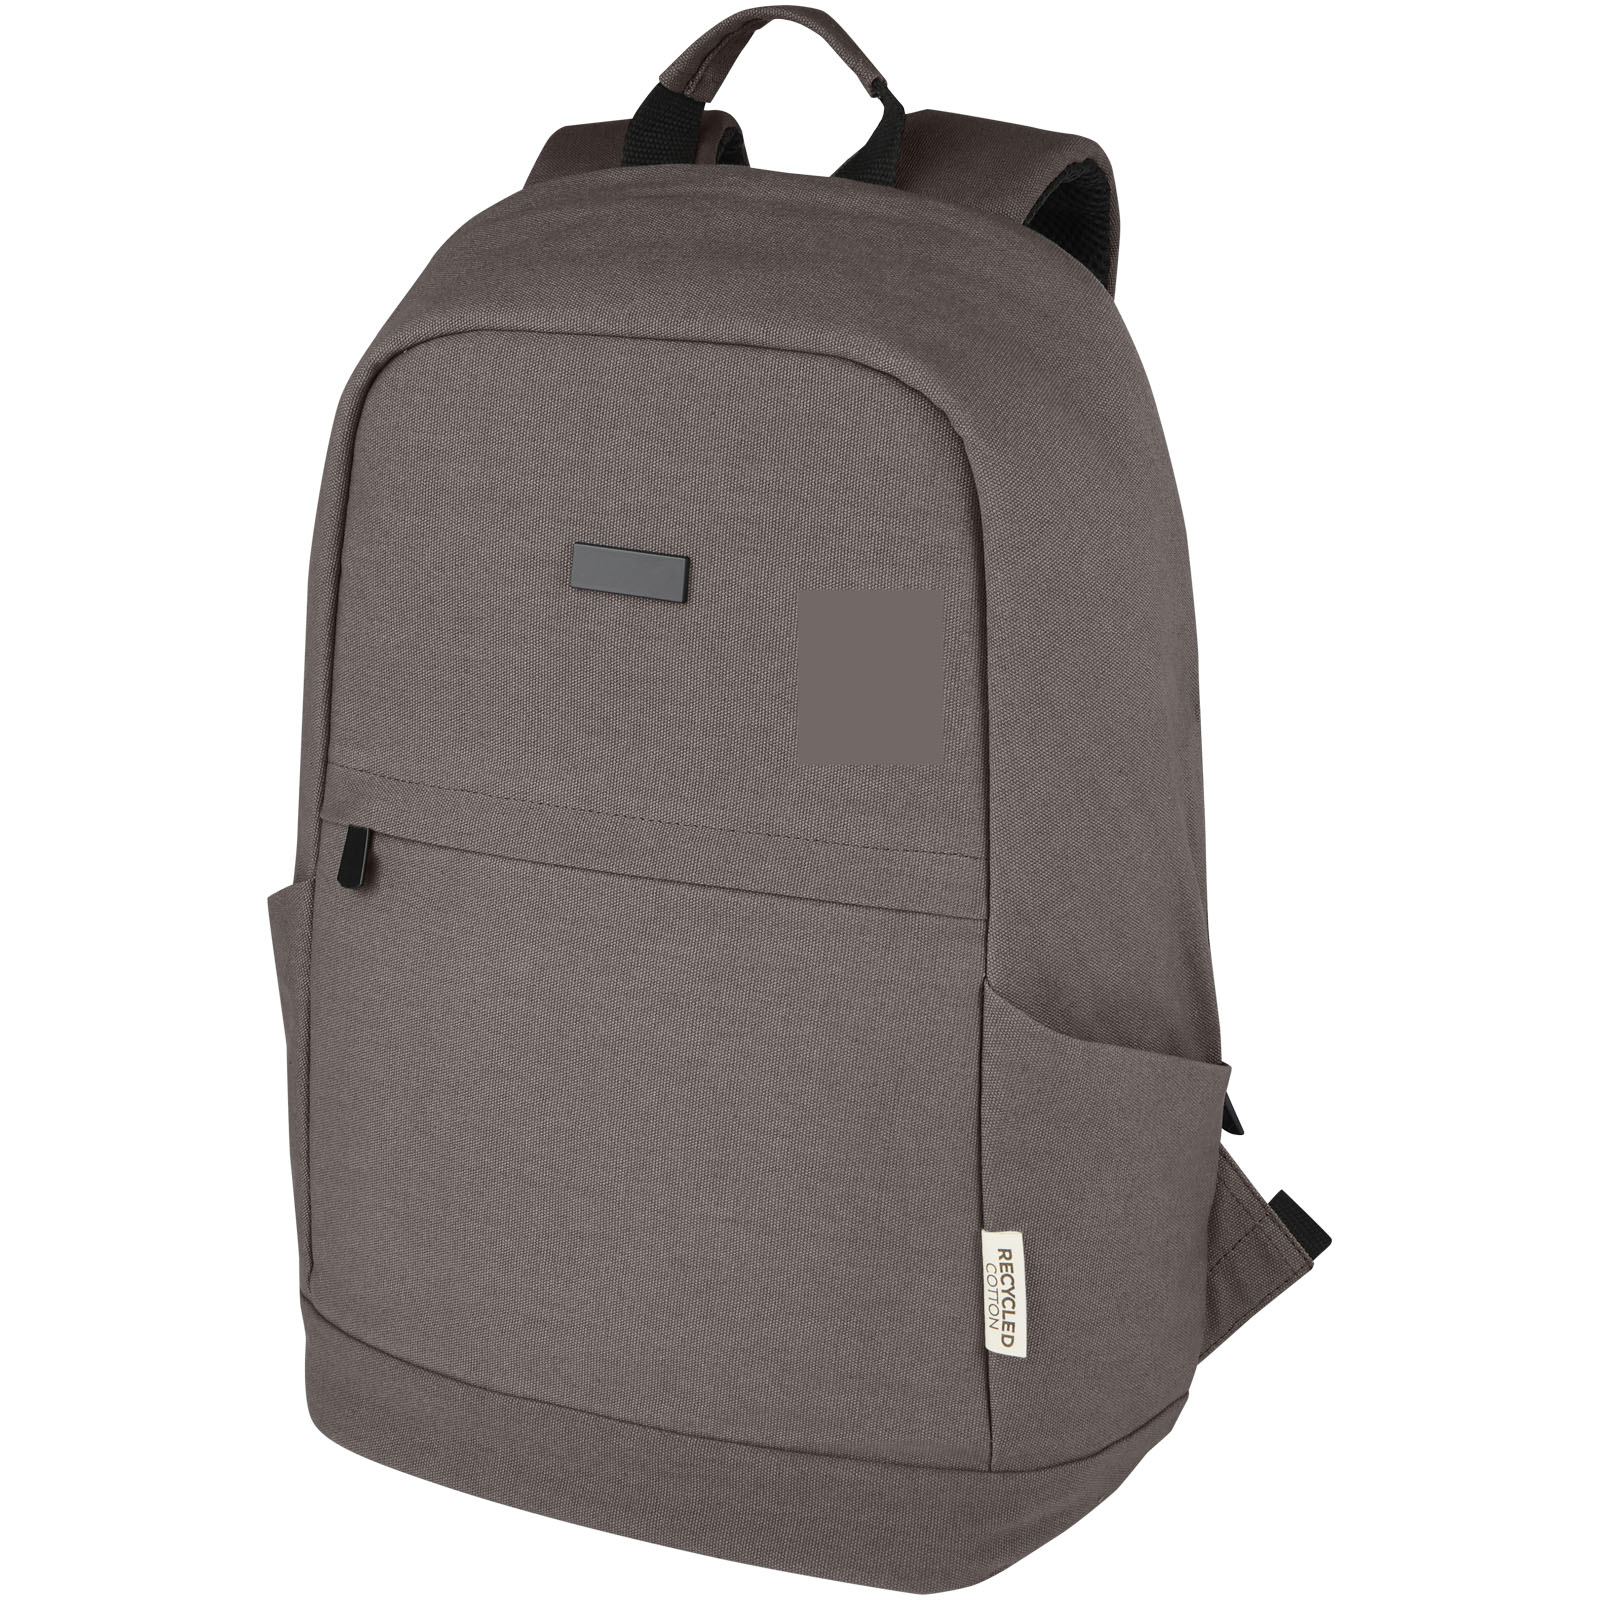 Canvas laptop backpack BRINER with anti-theft protection, 18 l